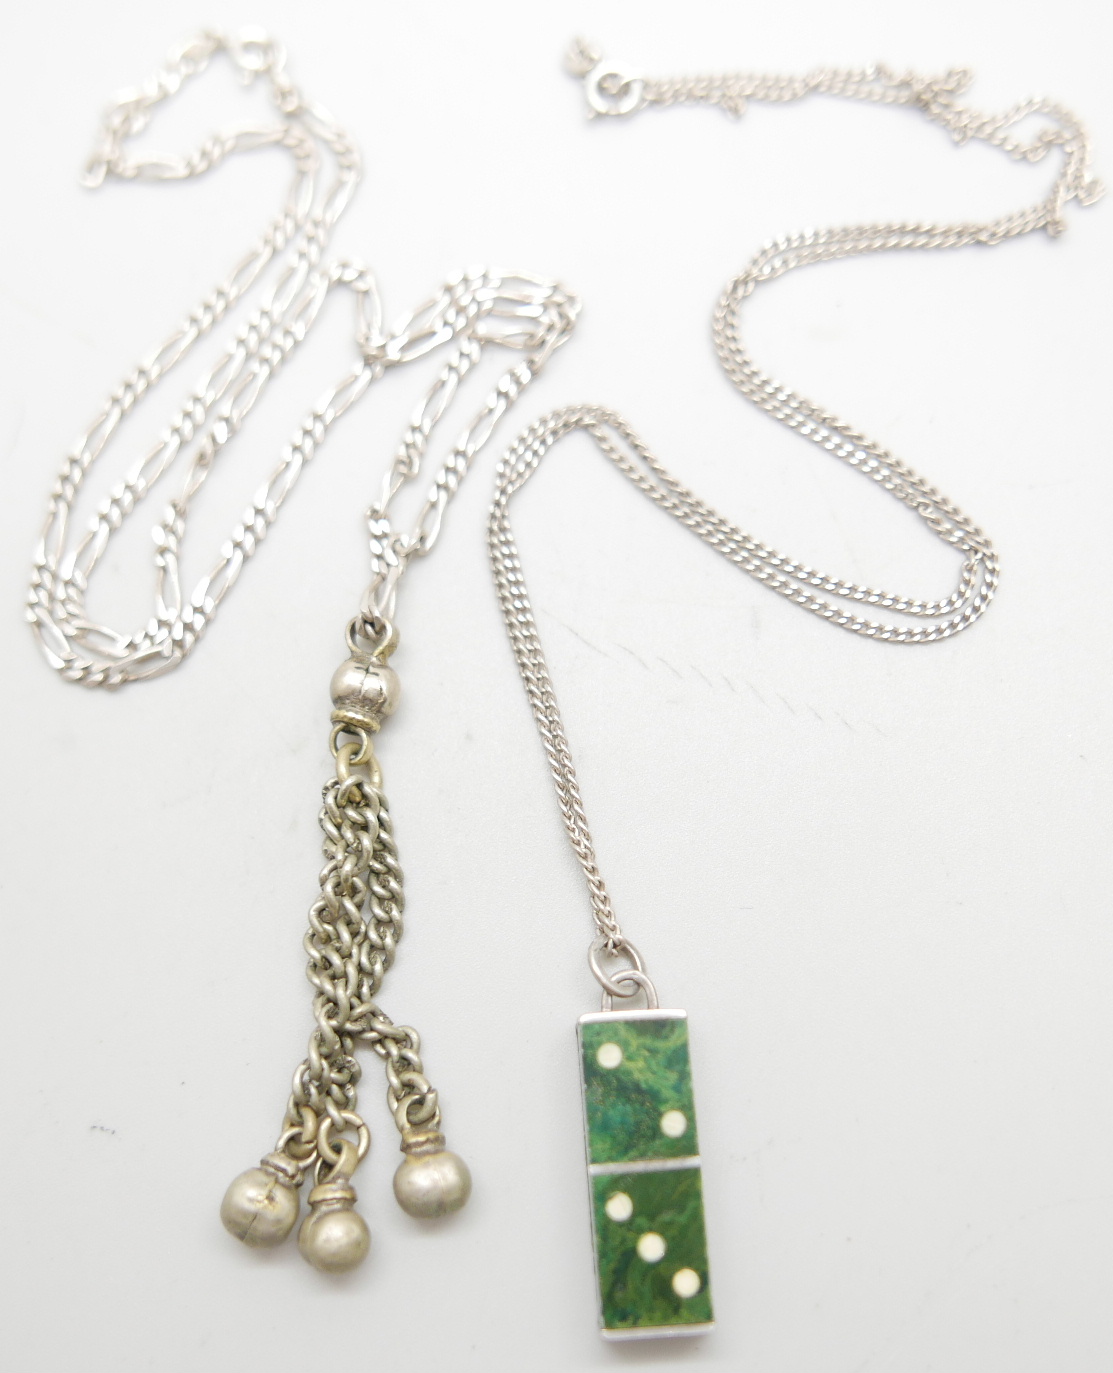 Two silver chains, a silver domino pendant and one other pendant